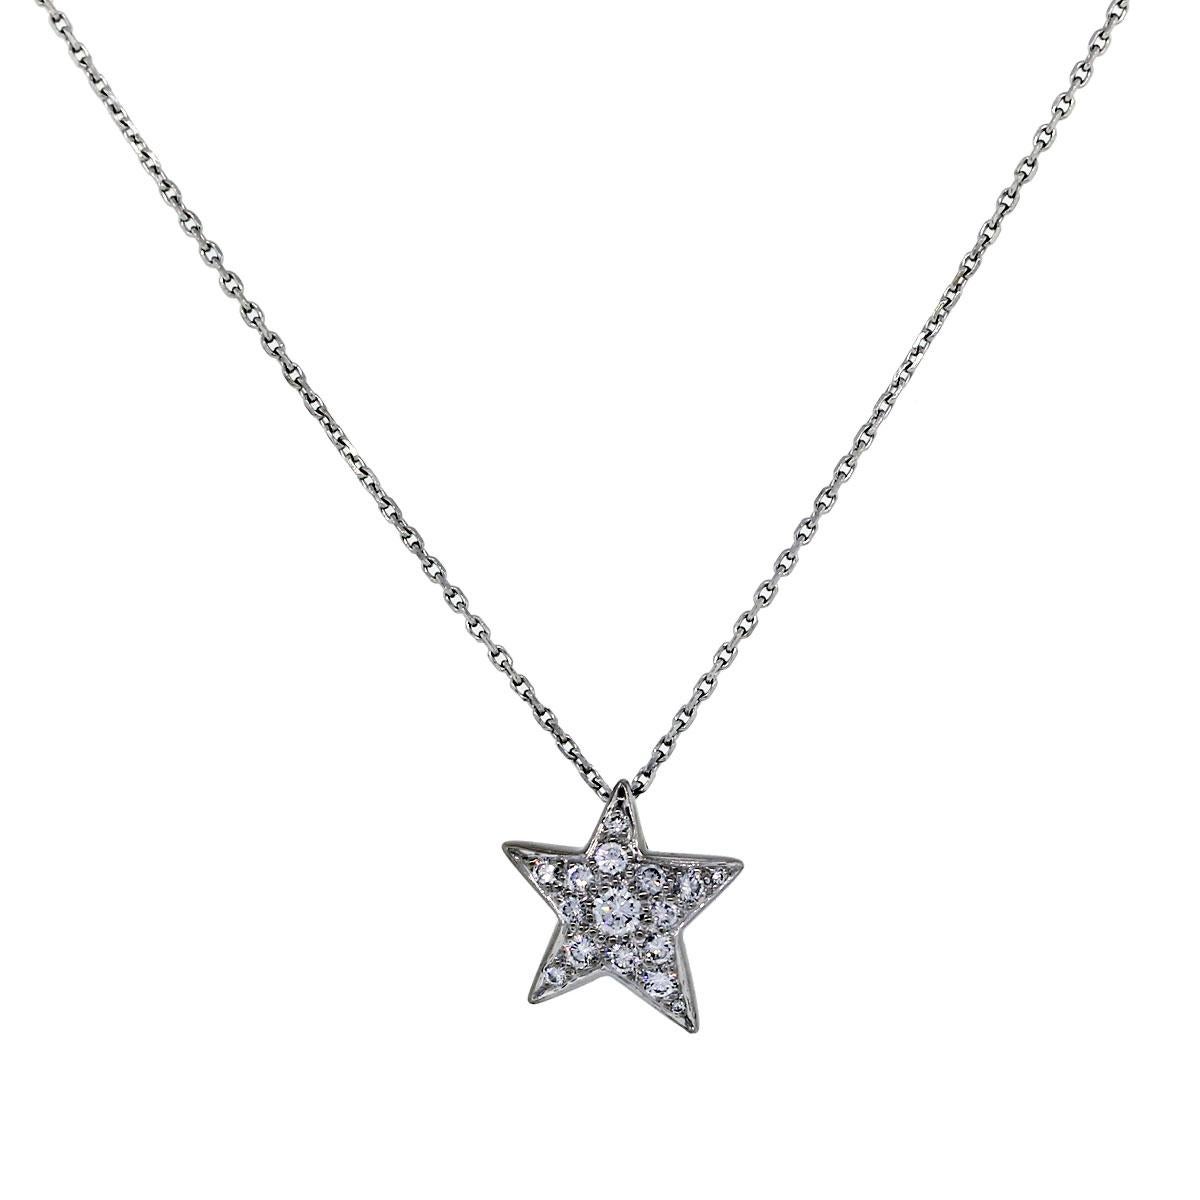 Style: CHANEL 18k White Gold Diamond Comet Star Necklace
Material: 18k White Gold
Total Weight: 8.5dwt (13.2g)
Necklace Length: Chain is 16''
Pendant Size: 3.0dwt (4.7g) 
Pendant Measurements: 15.04 x 14.55 mm
Diamond Details: Round Diamonds,